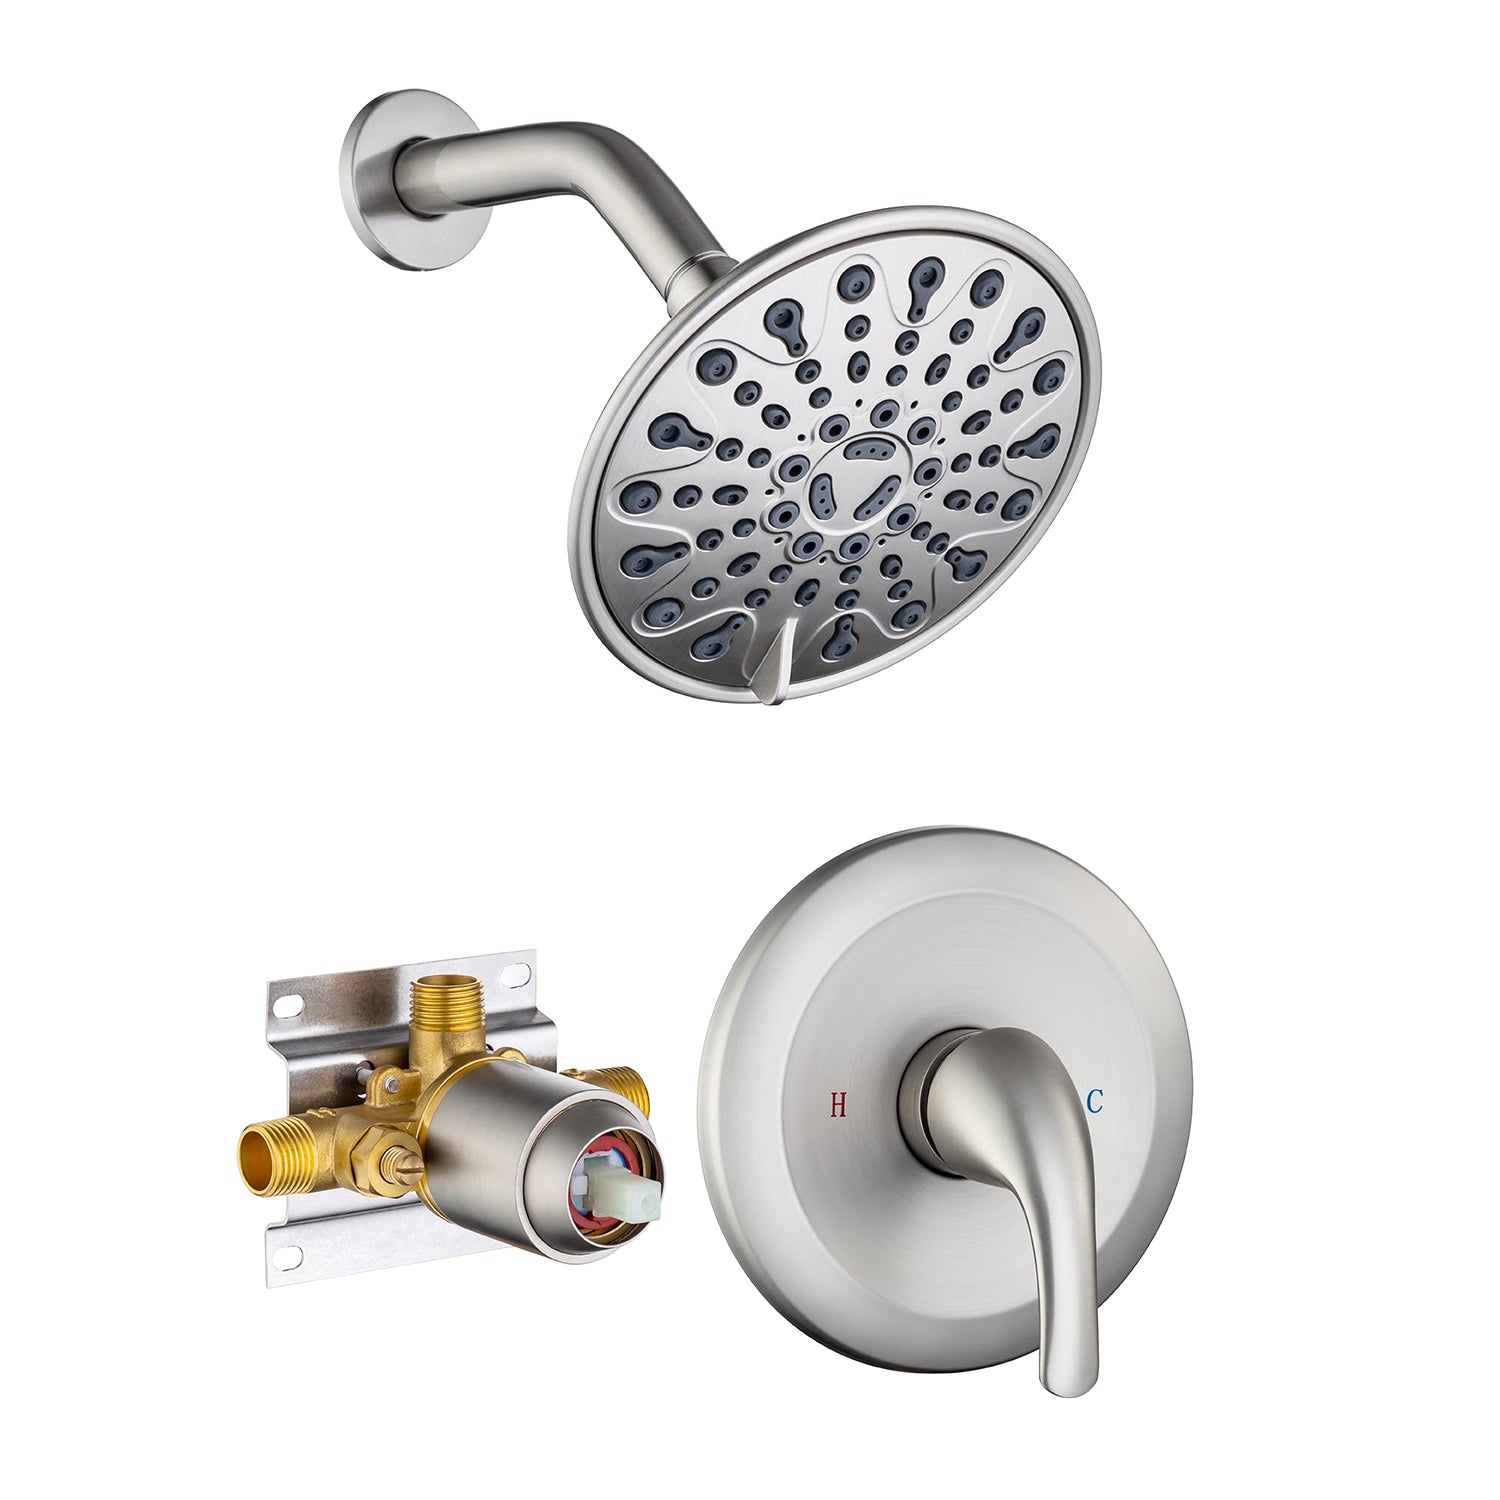 6-Spray Shower Faucet With Rough-In Valve RX92201-6